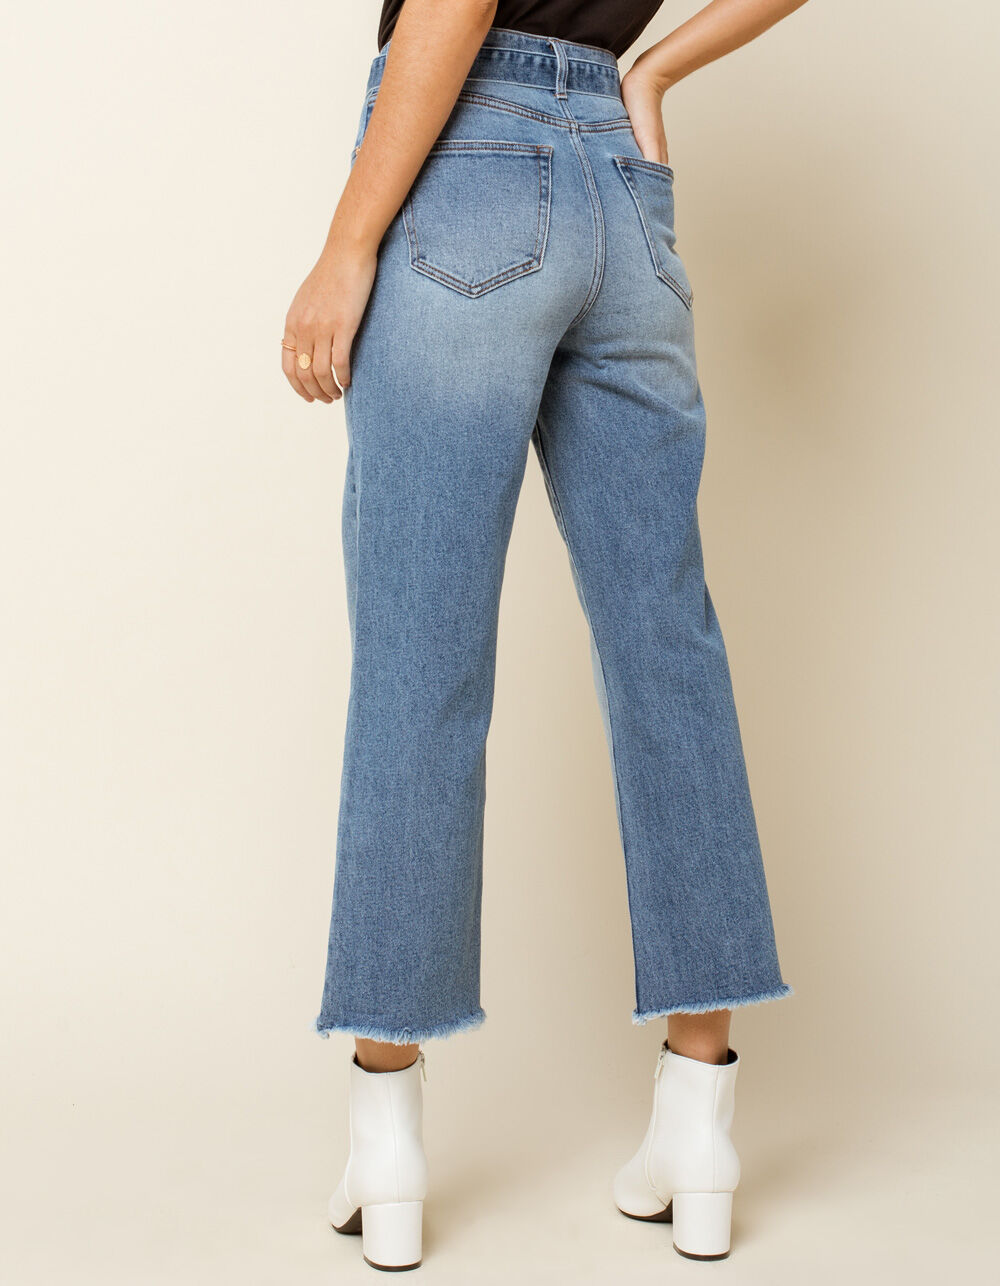 WEST OF MELROSE On The Rise Wide Leg Womens Jeans - MEDIUM WASH | Tillys